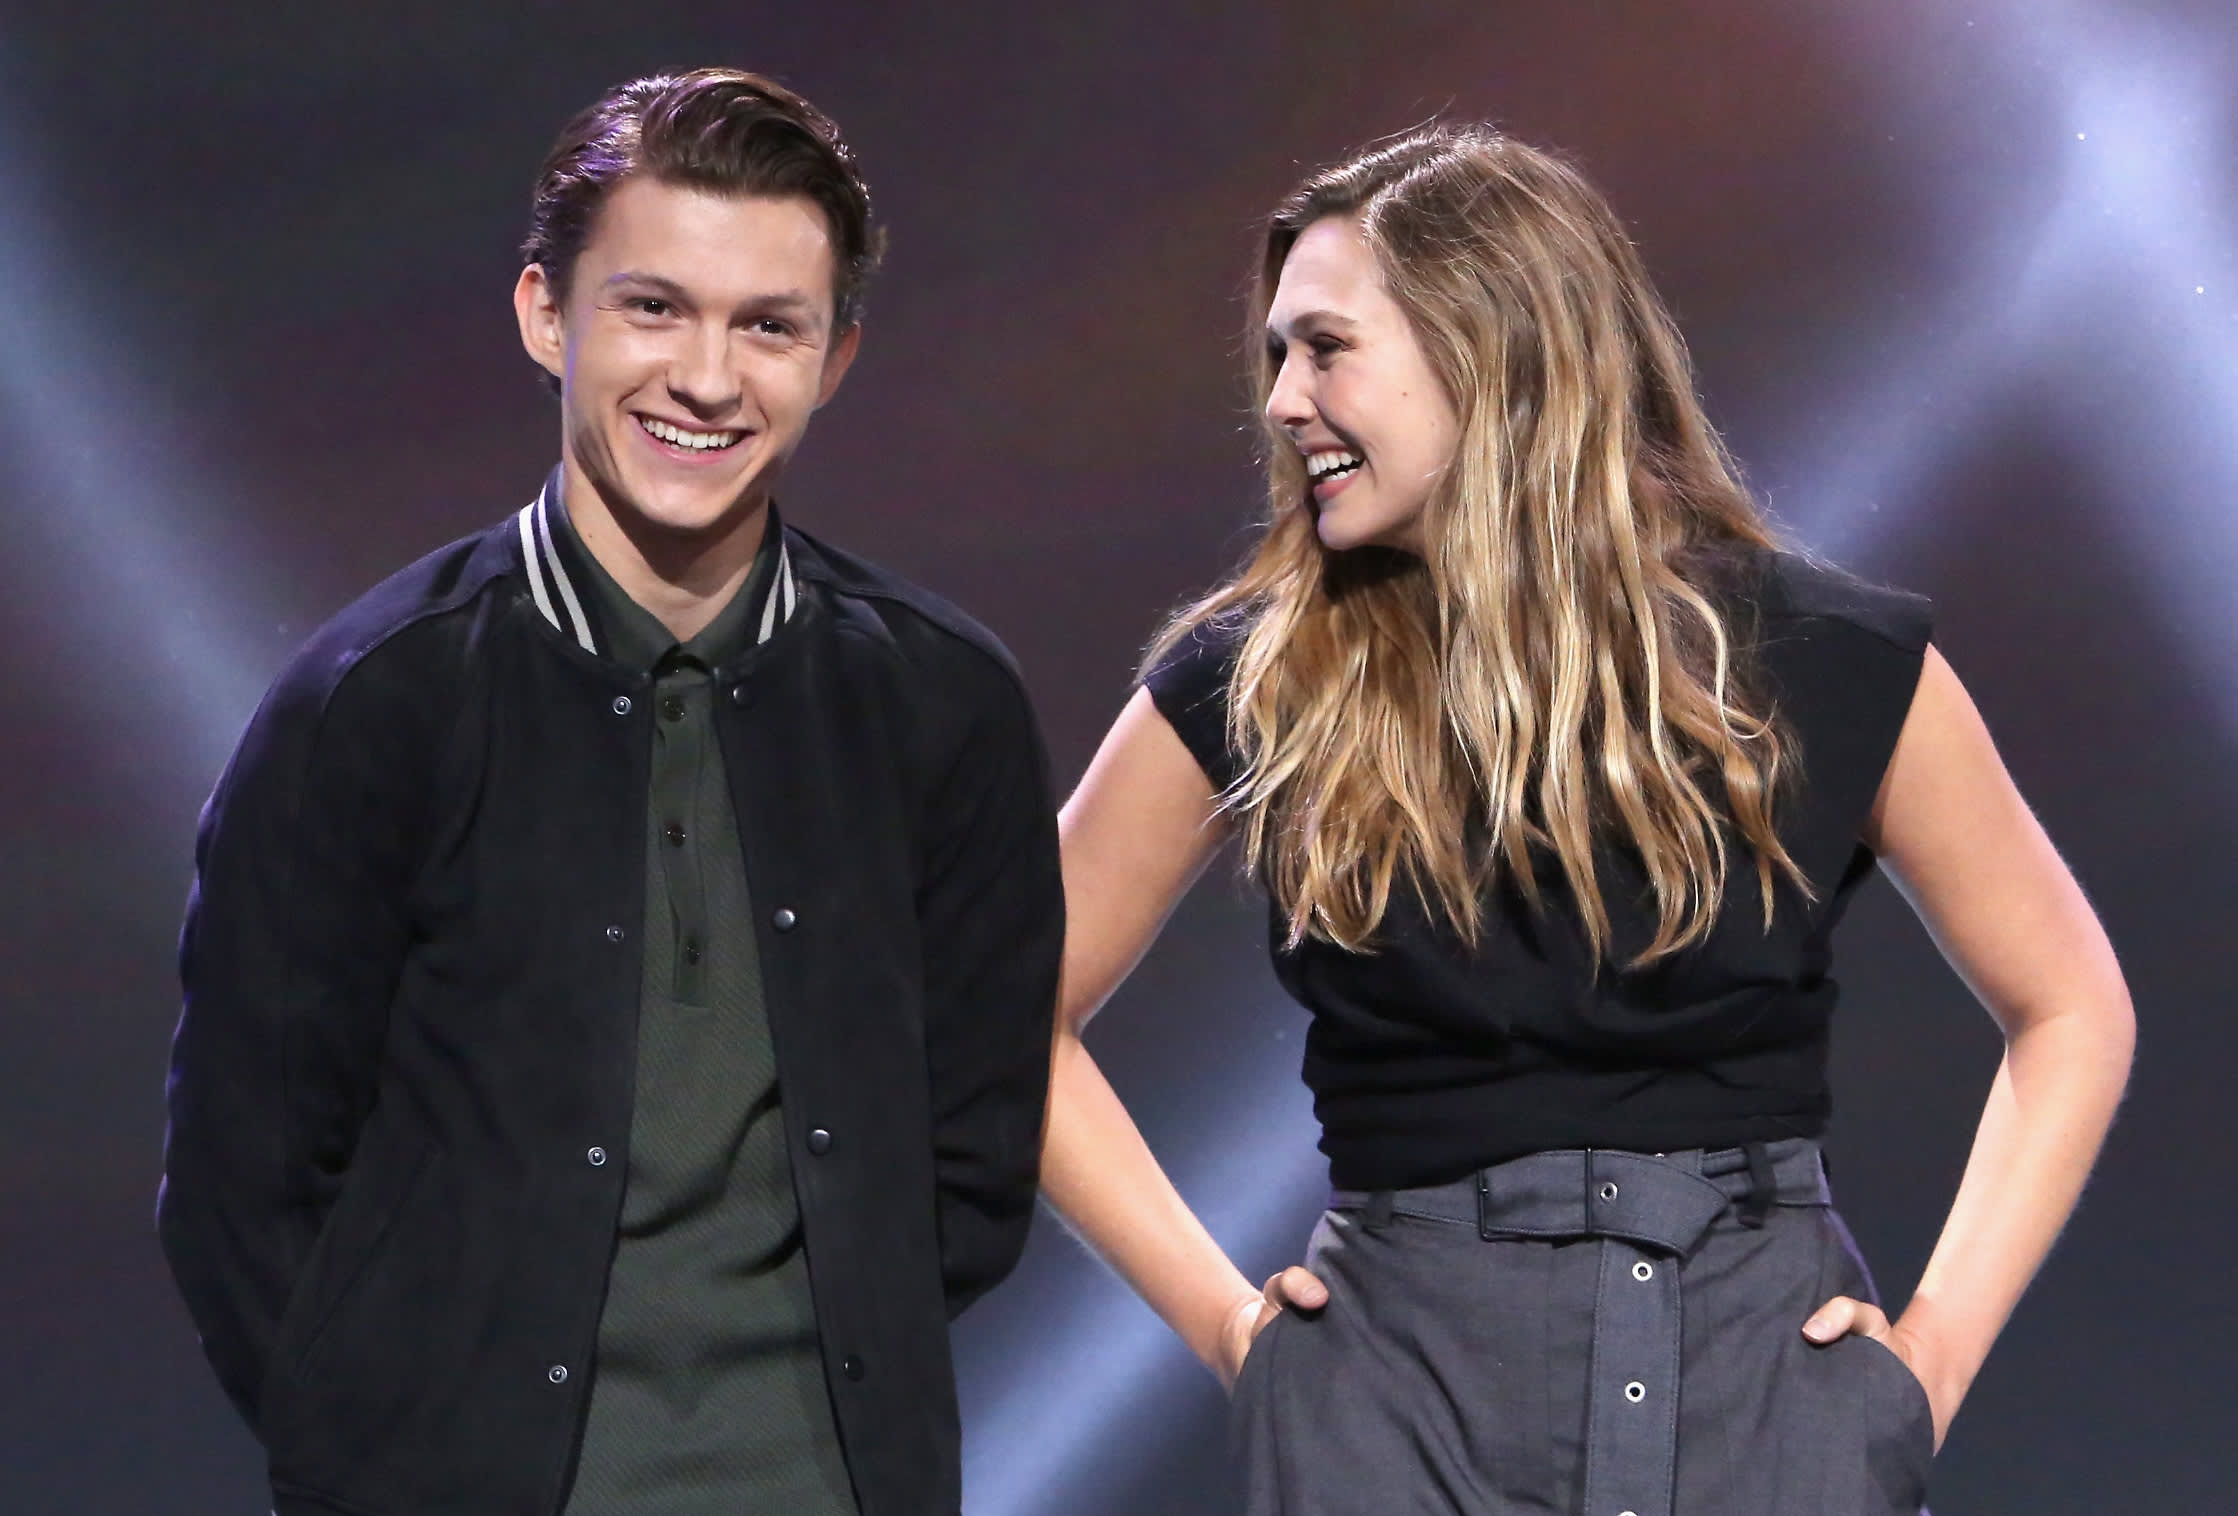 'Spider-Man' star Tom Holland shared the ‘amazing’ career advice he received from Elizabeth Olsen